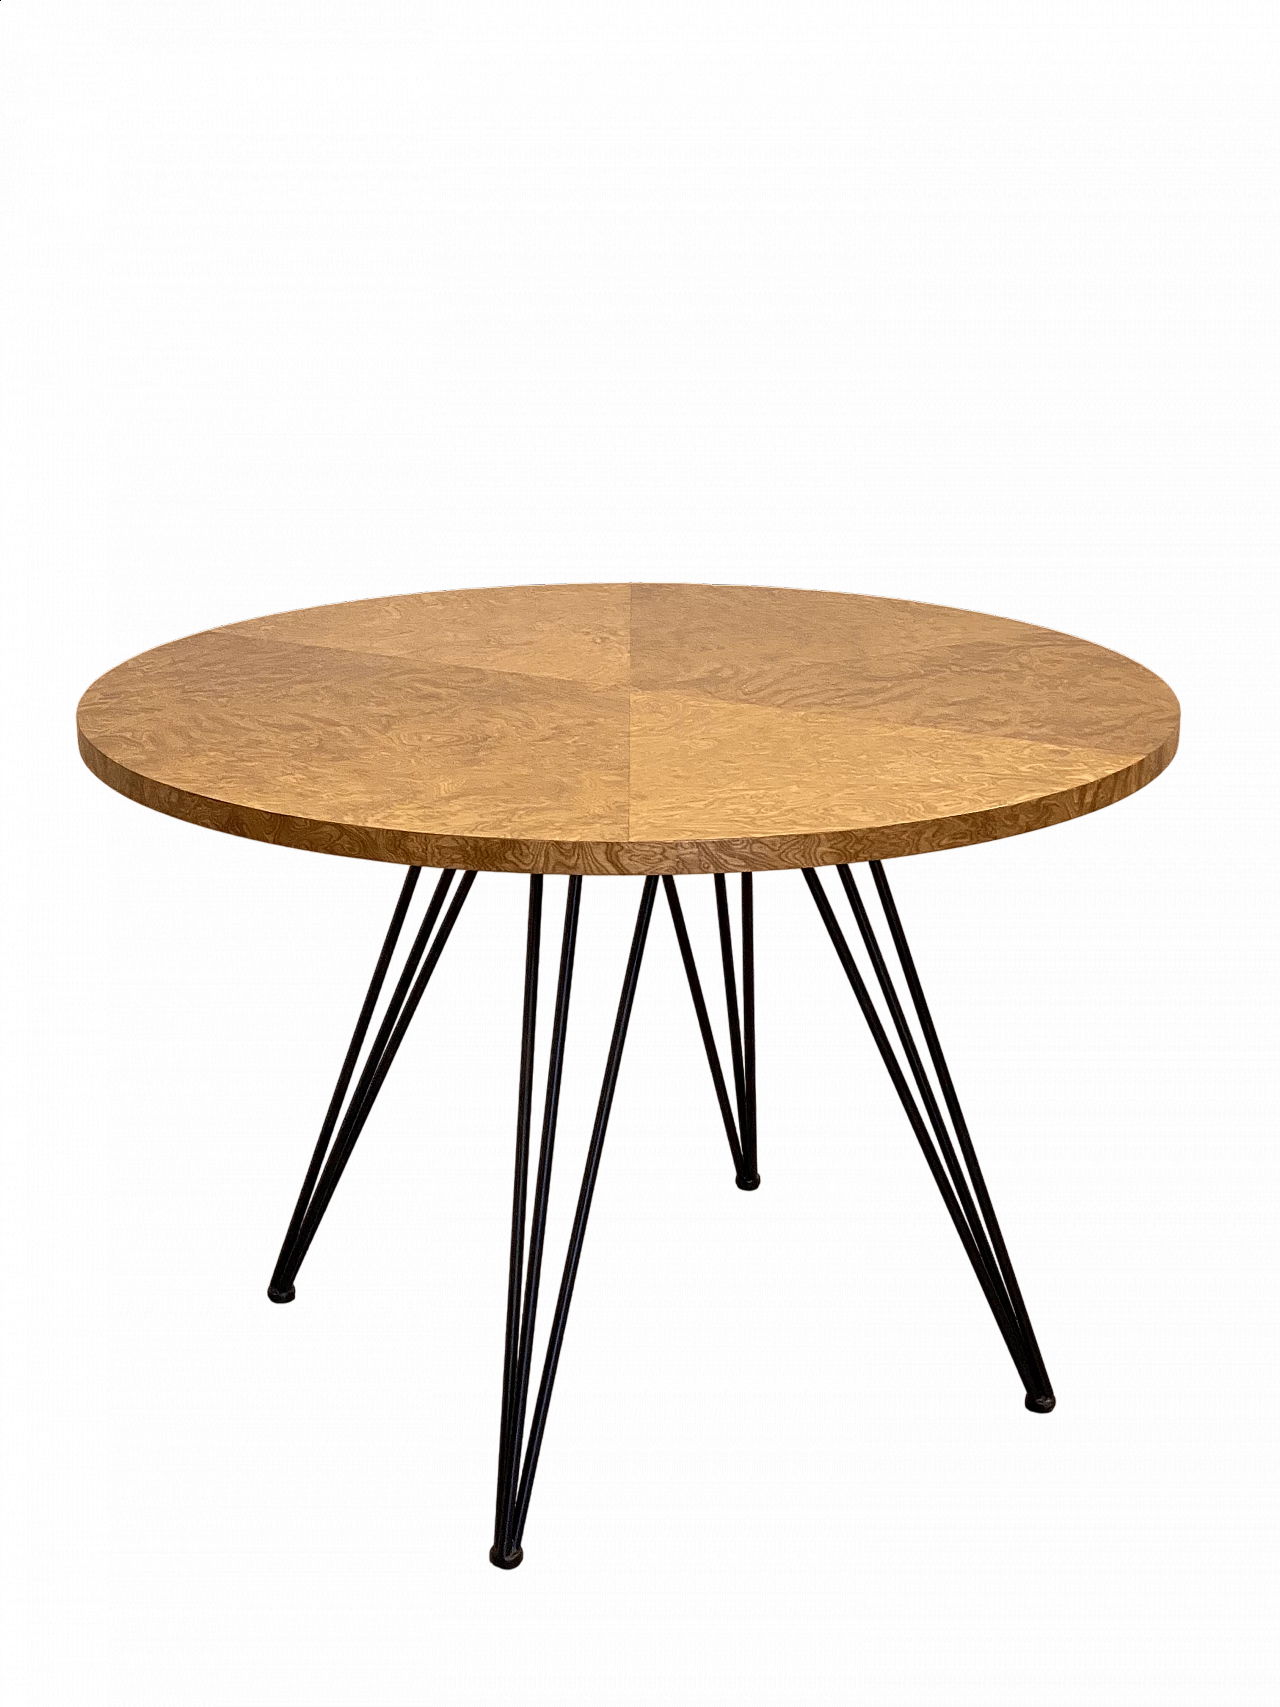 Round iron table with ALPIlignum panelled top, 1960s 15